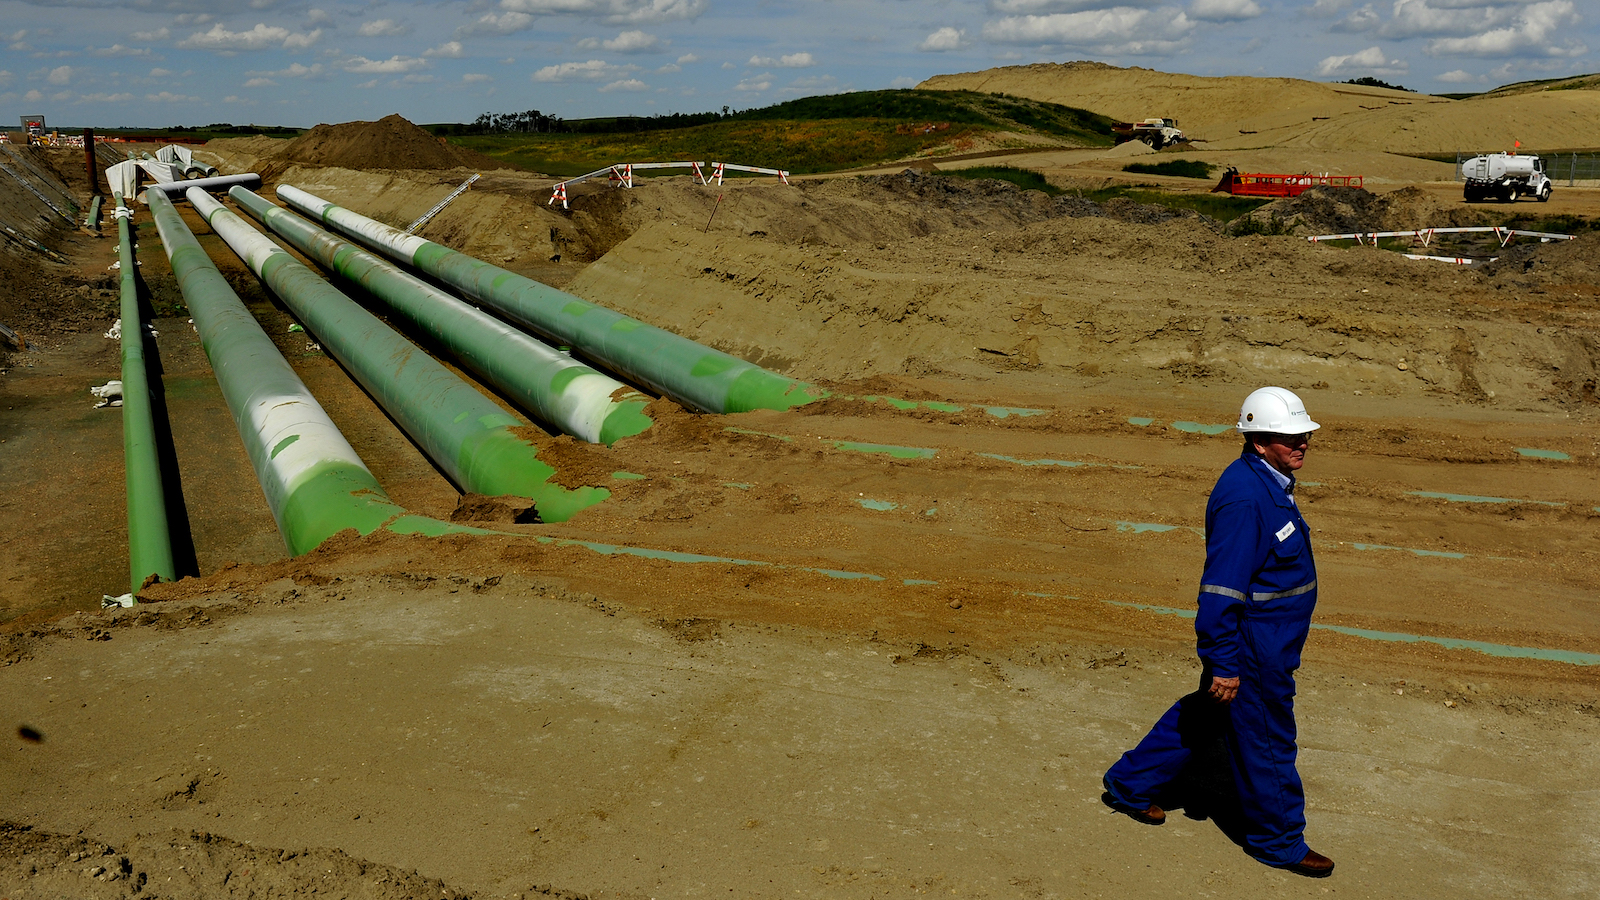 Green pipelines under construction for the Keystone XL pipeline in Alberta, Canada.